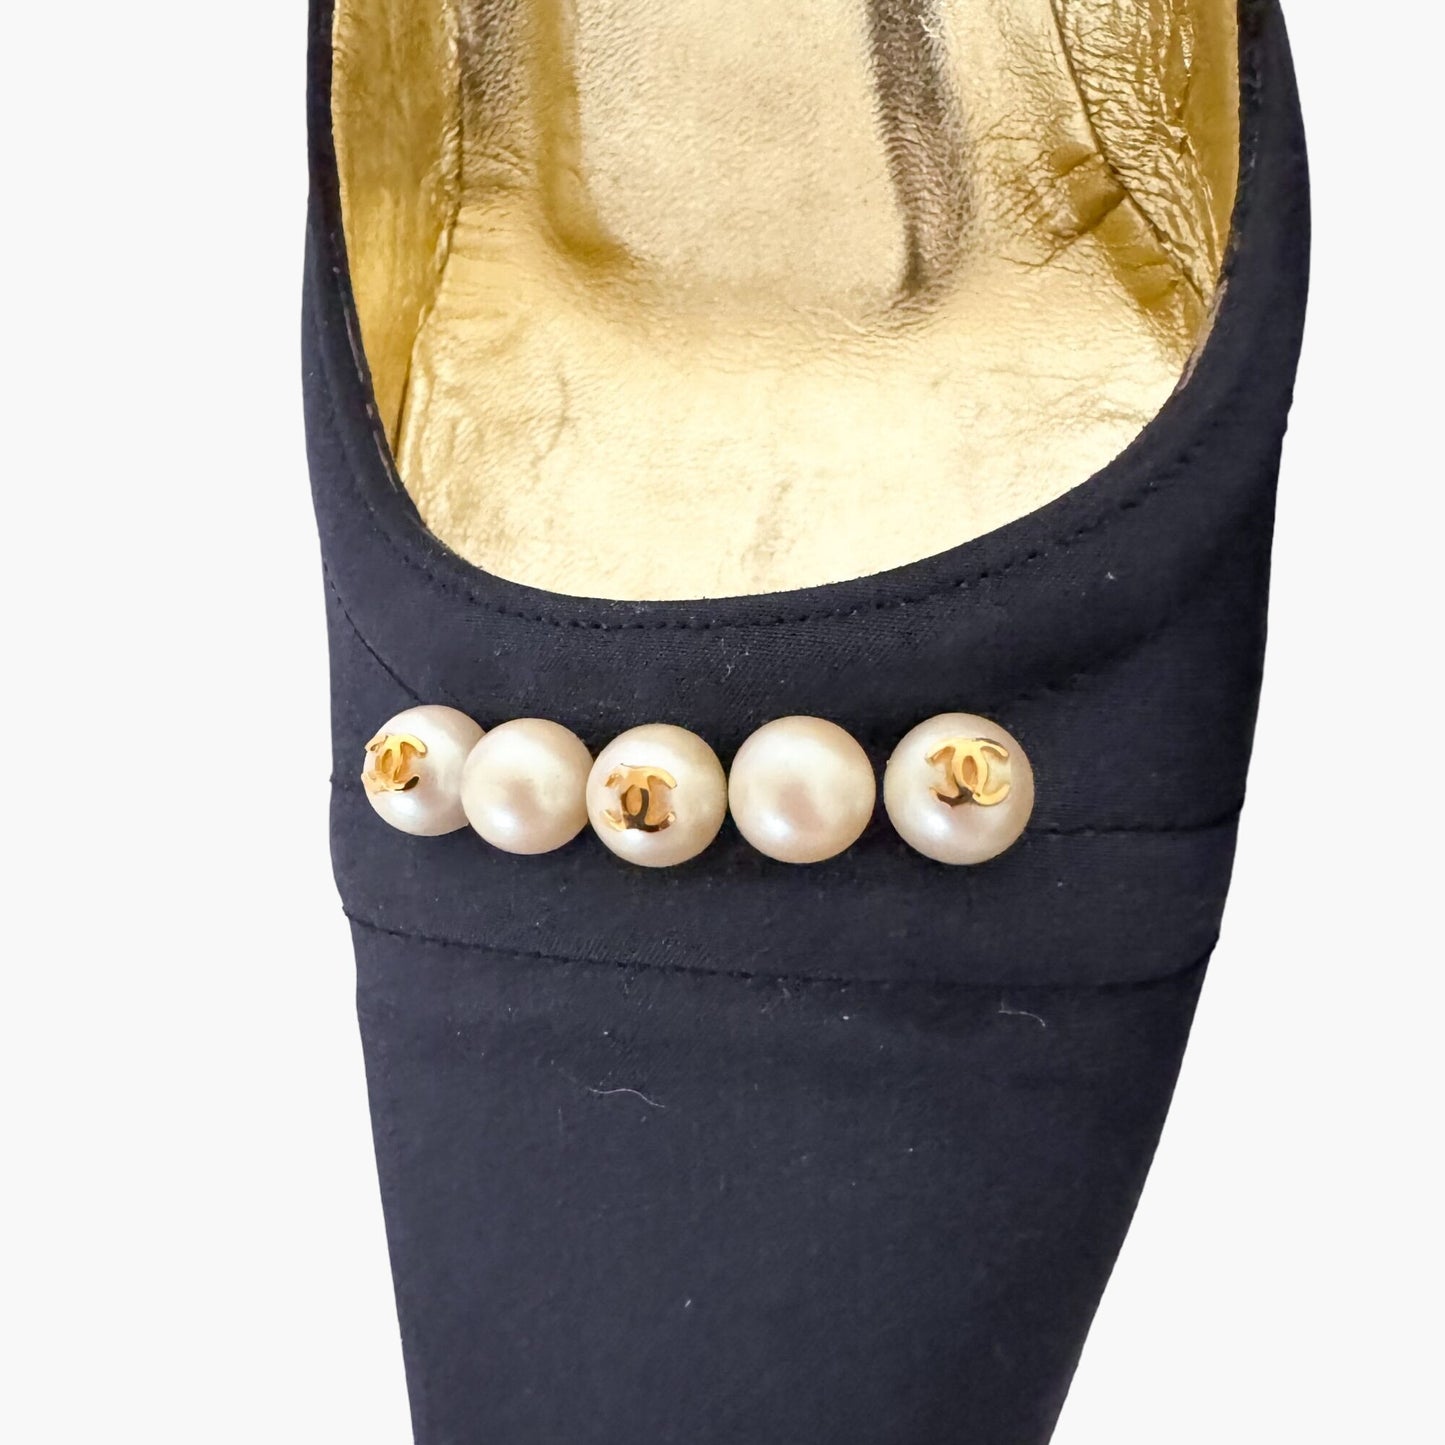 Chanel Vintage CC Pearl Pumps in Navy Blue Size 37.5